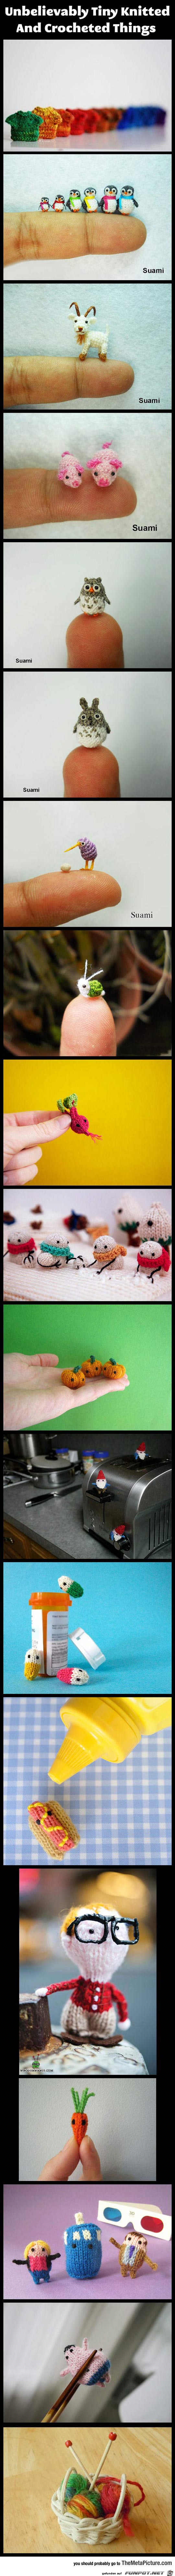 cool-tiny-knitted-things-sweaters- penguins httpthemetapictu